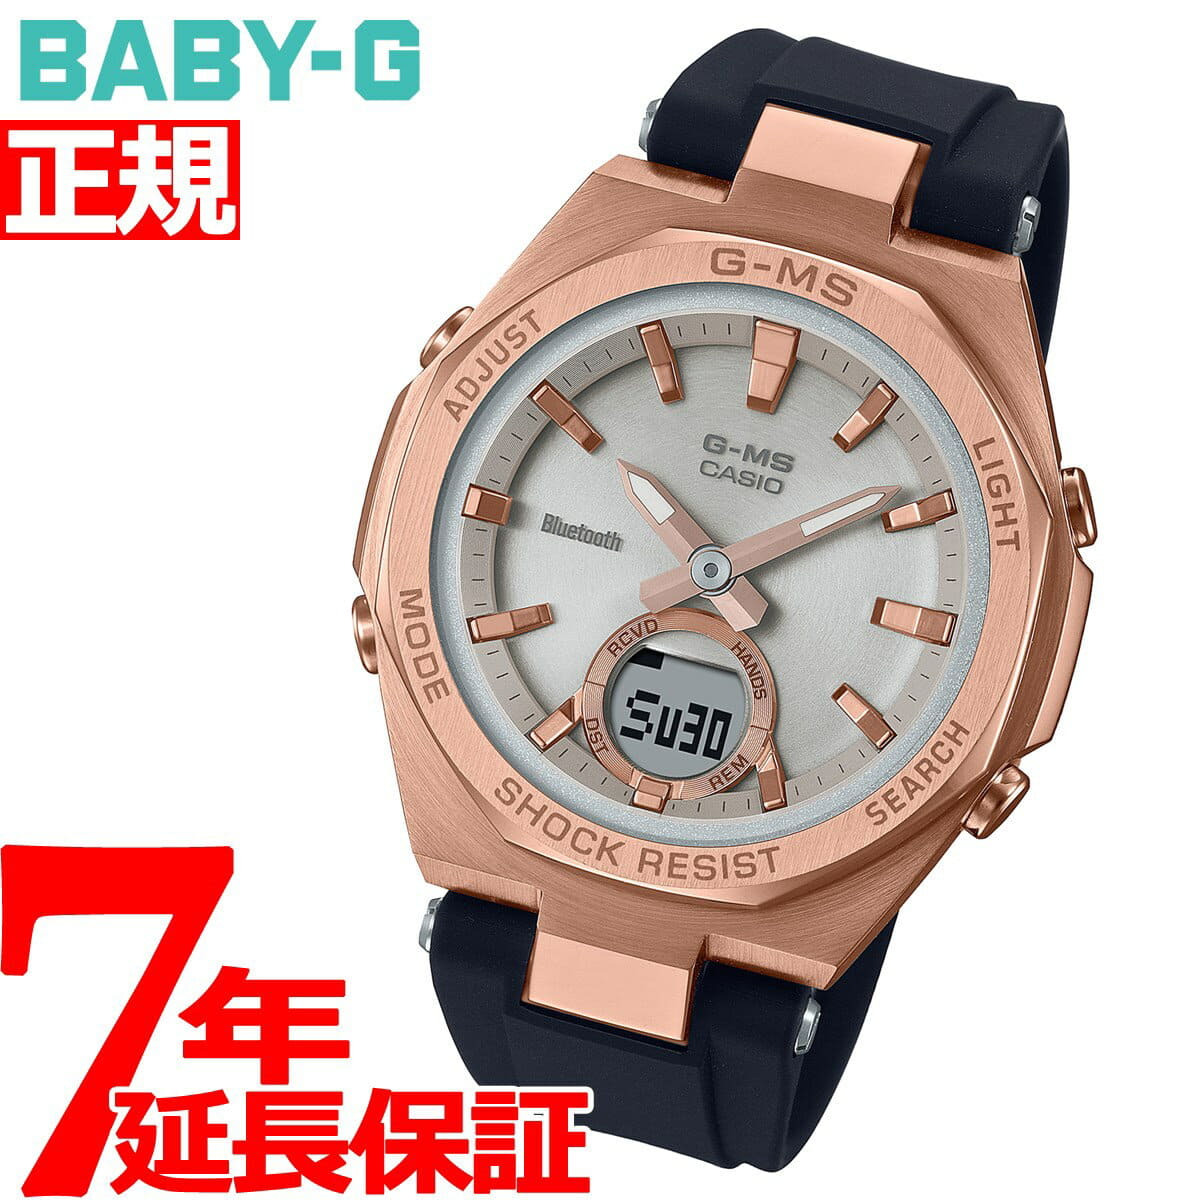 New]0:00 ...! Up to 2,000  up to 60.5 times! It is BABY-G Casio baby G  Ladies G-MS solar smartphone link MSG-B100G-1AJF 2021 latest until 23:59 -  BE FORWARD Store